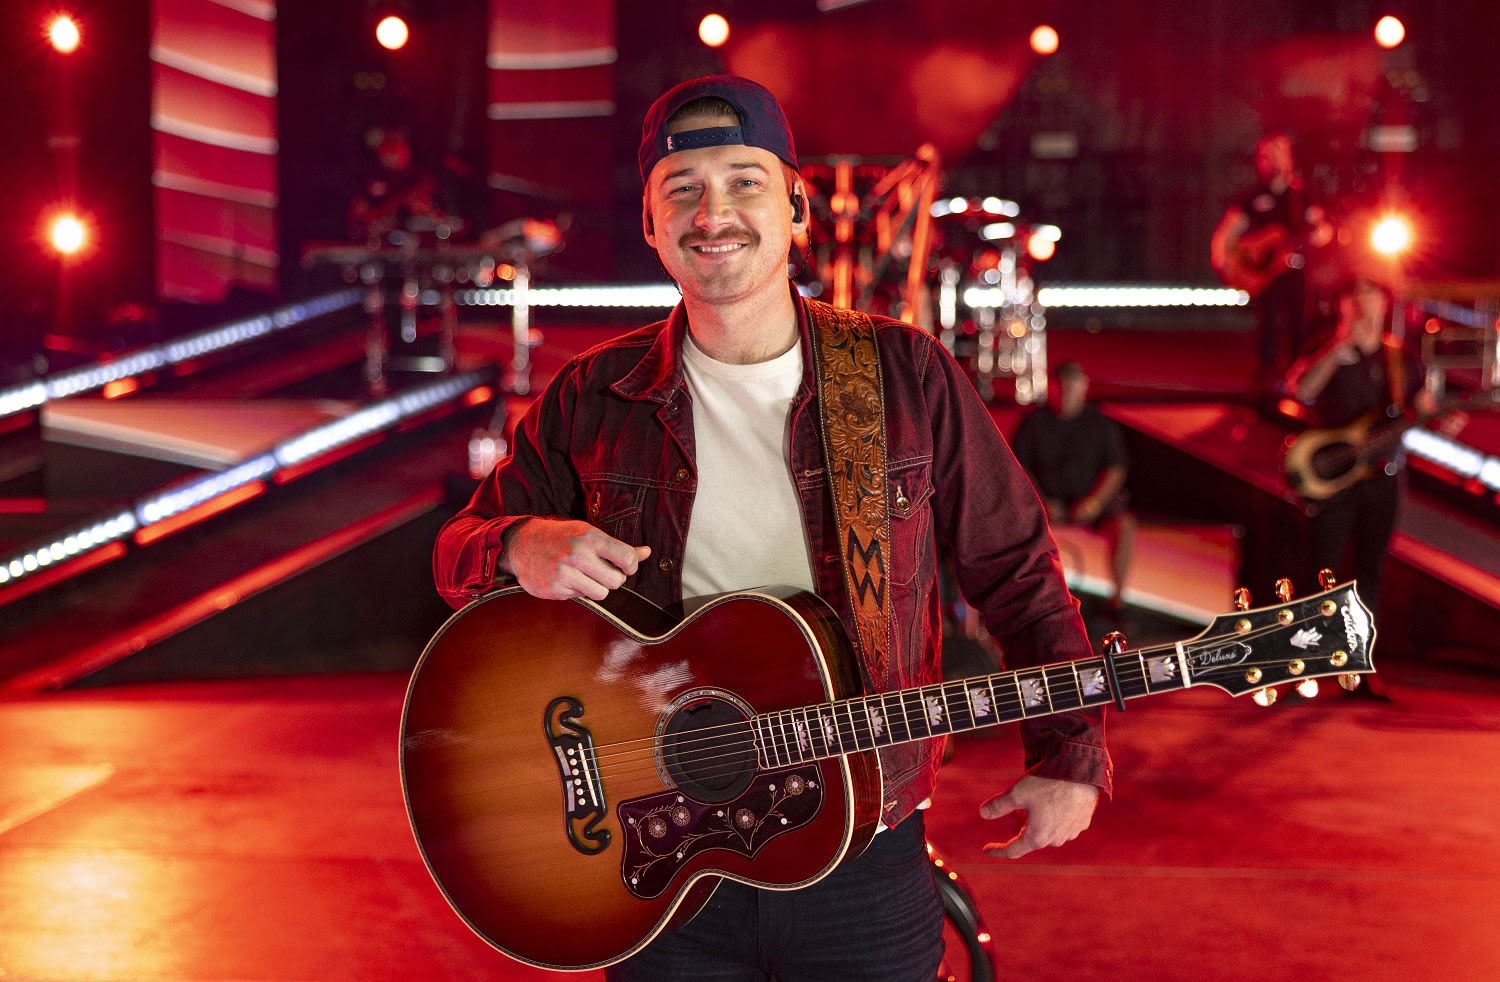 Morgan Wallen was denied a sign outside his Nashville bar just before its opening. Here’s why